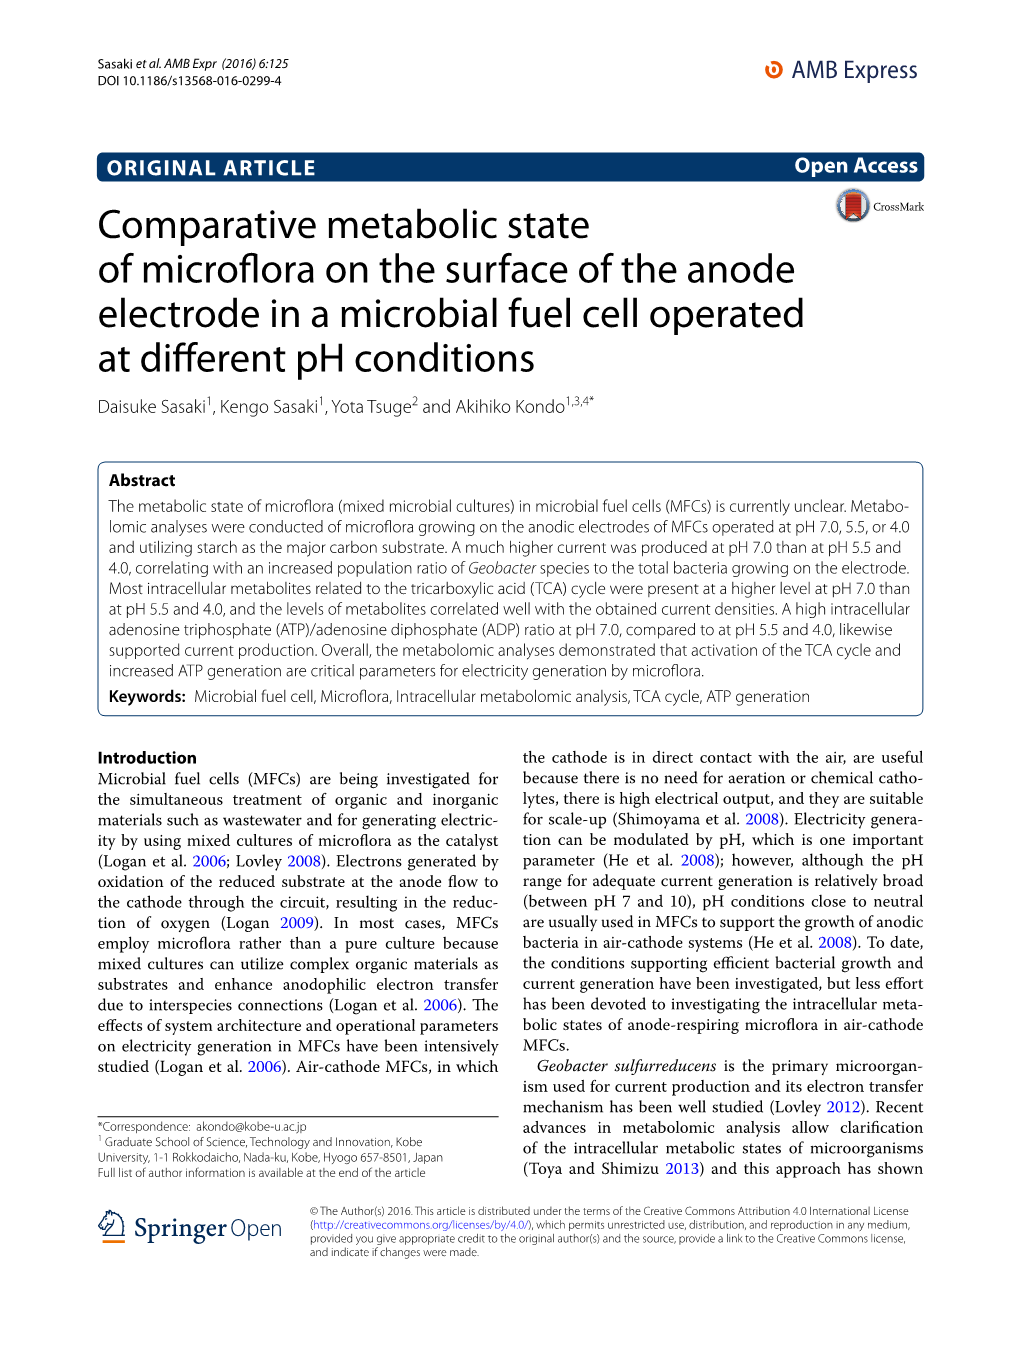 Comparative Metabolic State of Microflora on the Surface of The